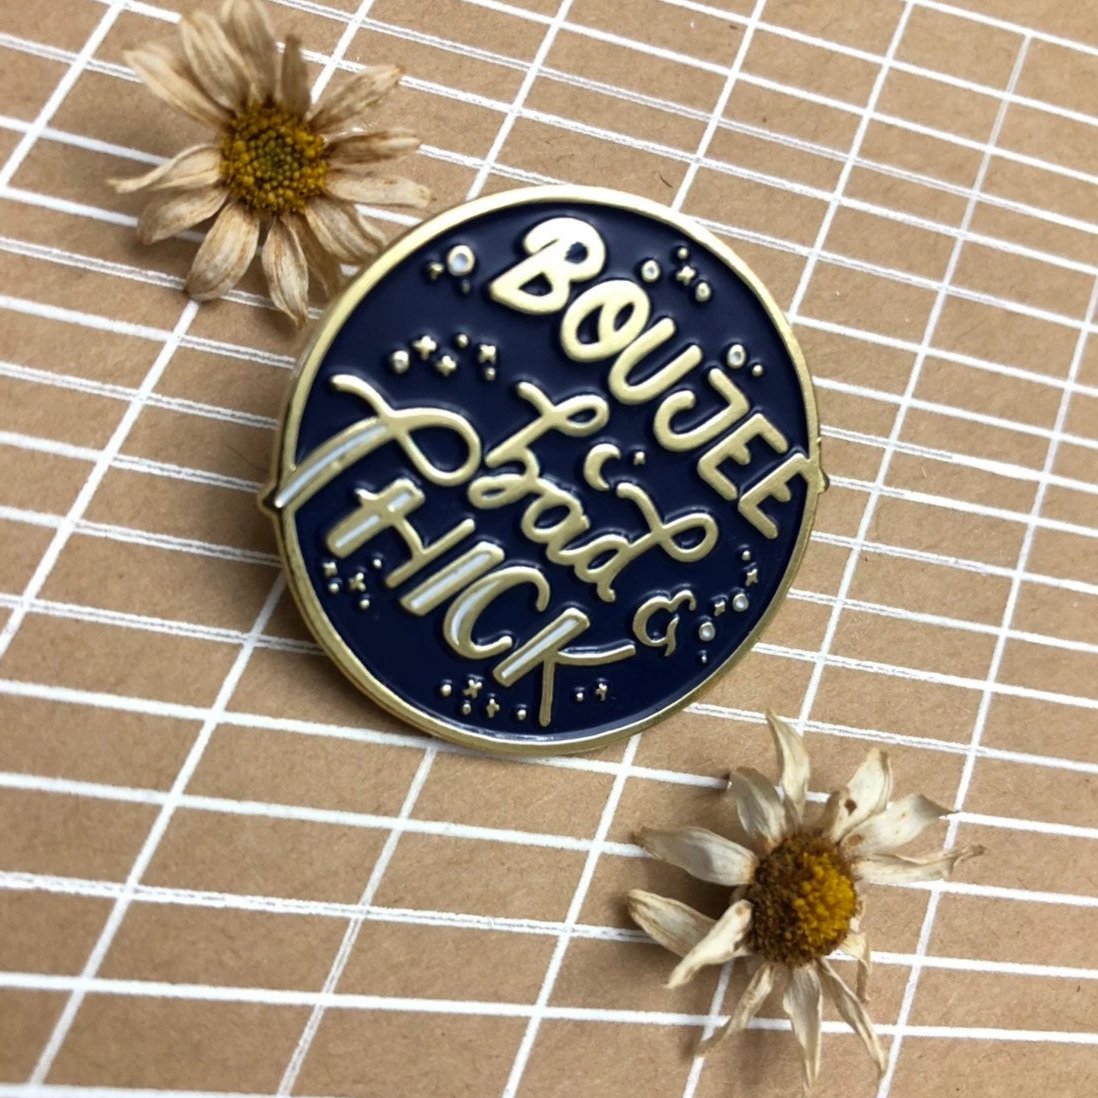 Boujee Bad and Thick Enamel Pin